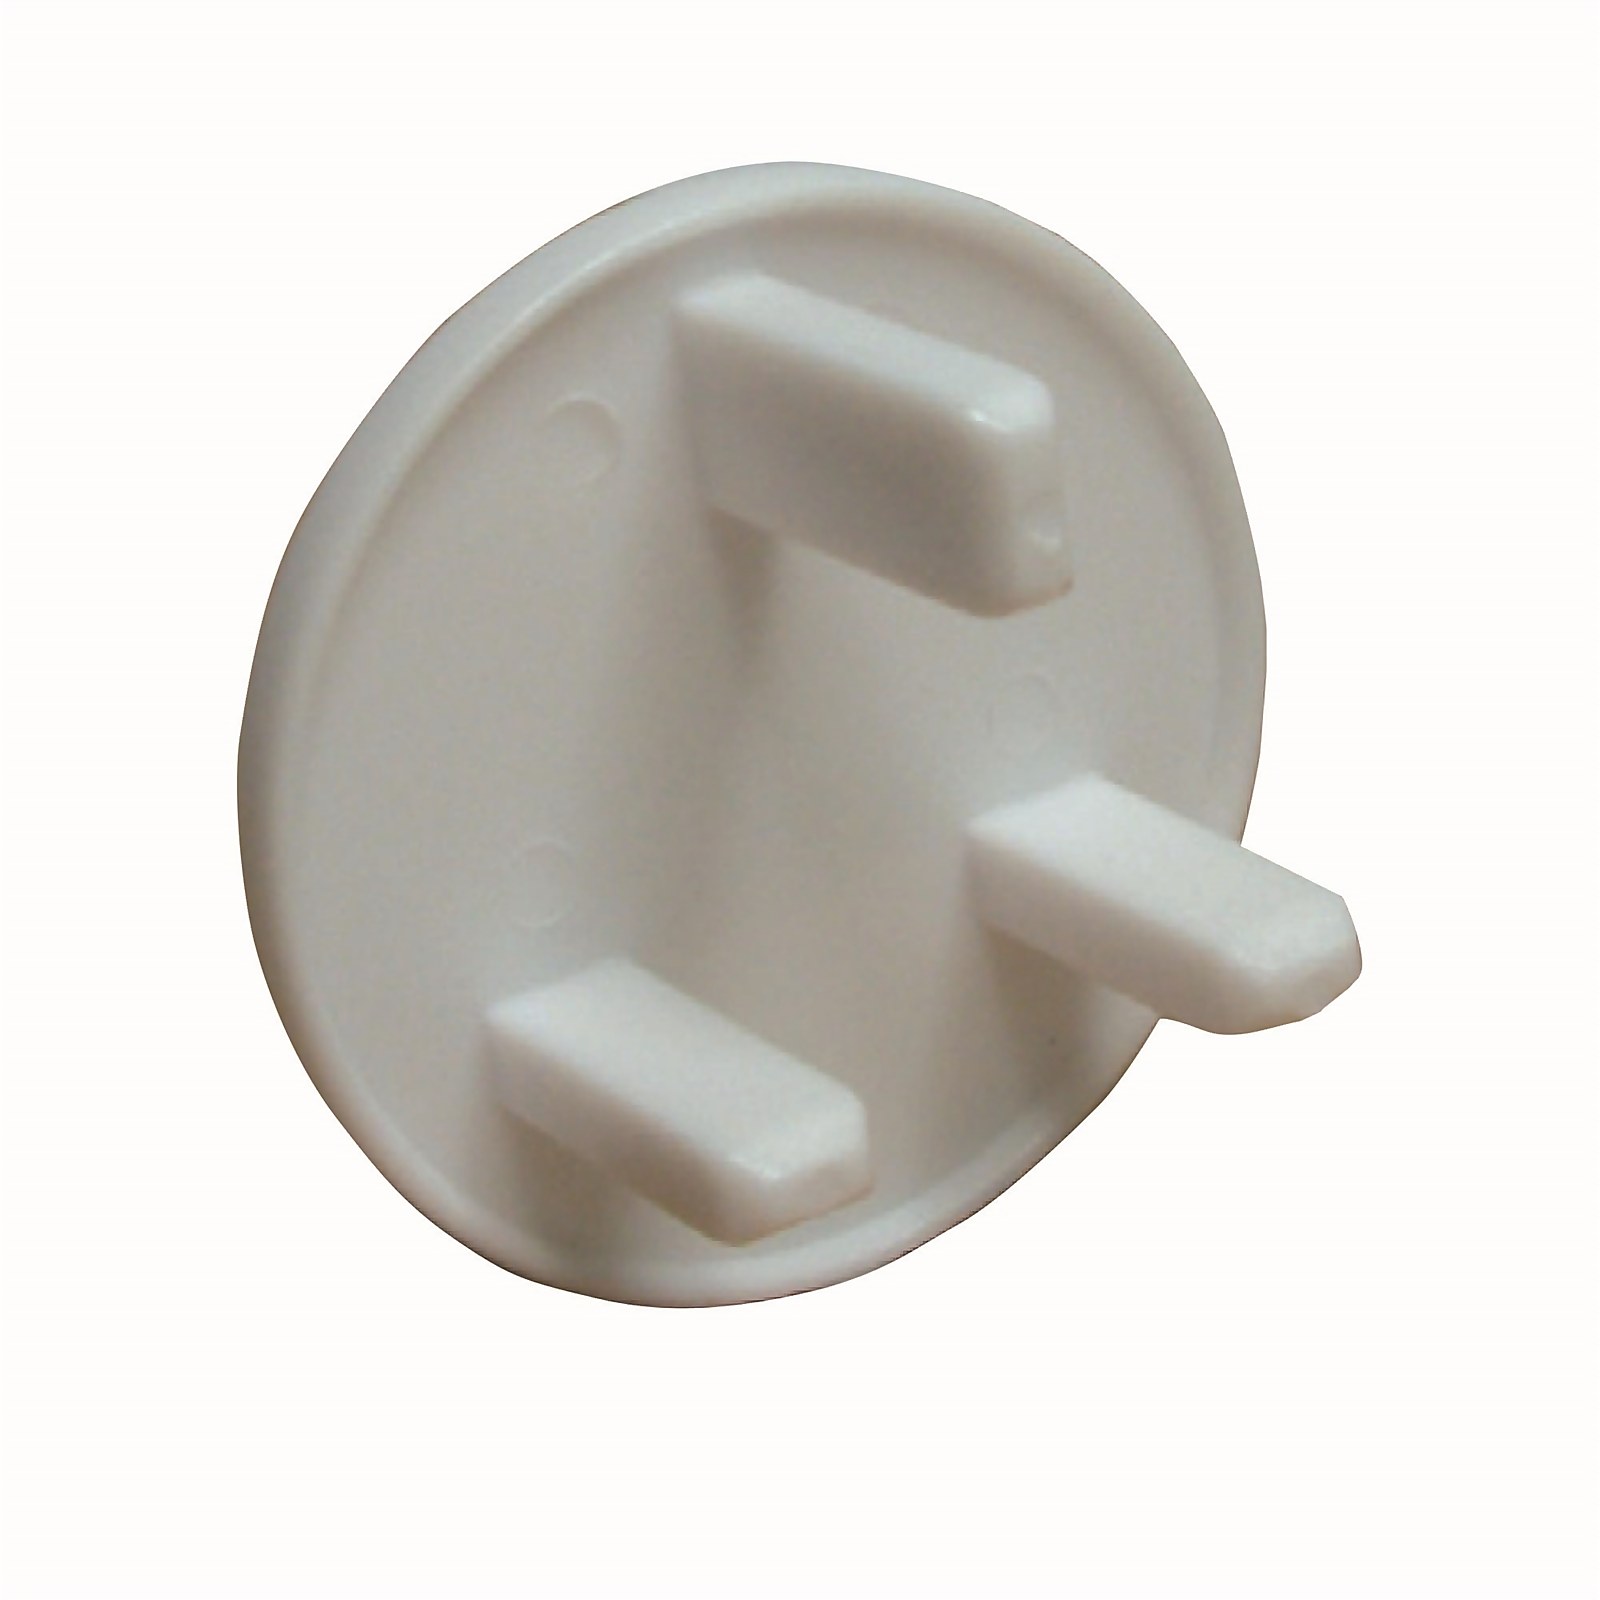 Photo of Dreambaby Socket Covers Extra Value - White - 12 Pack